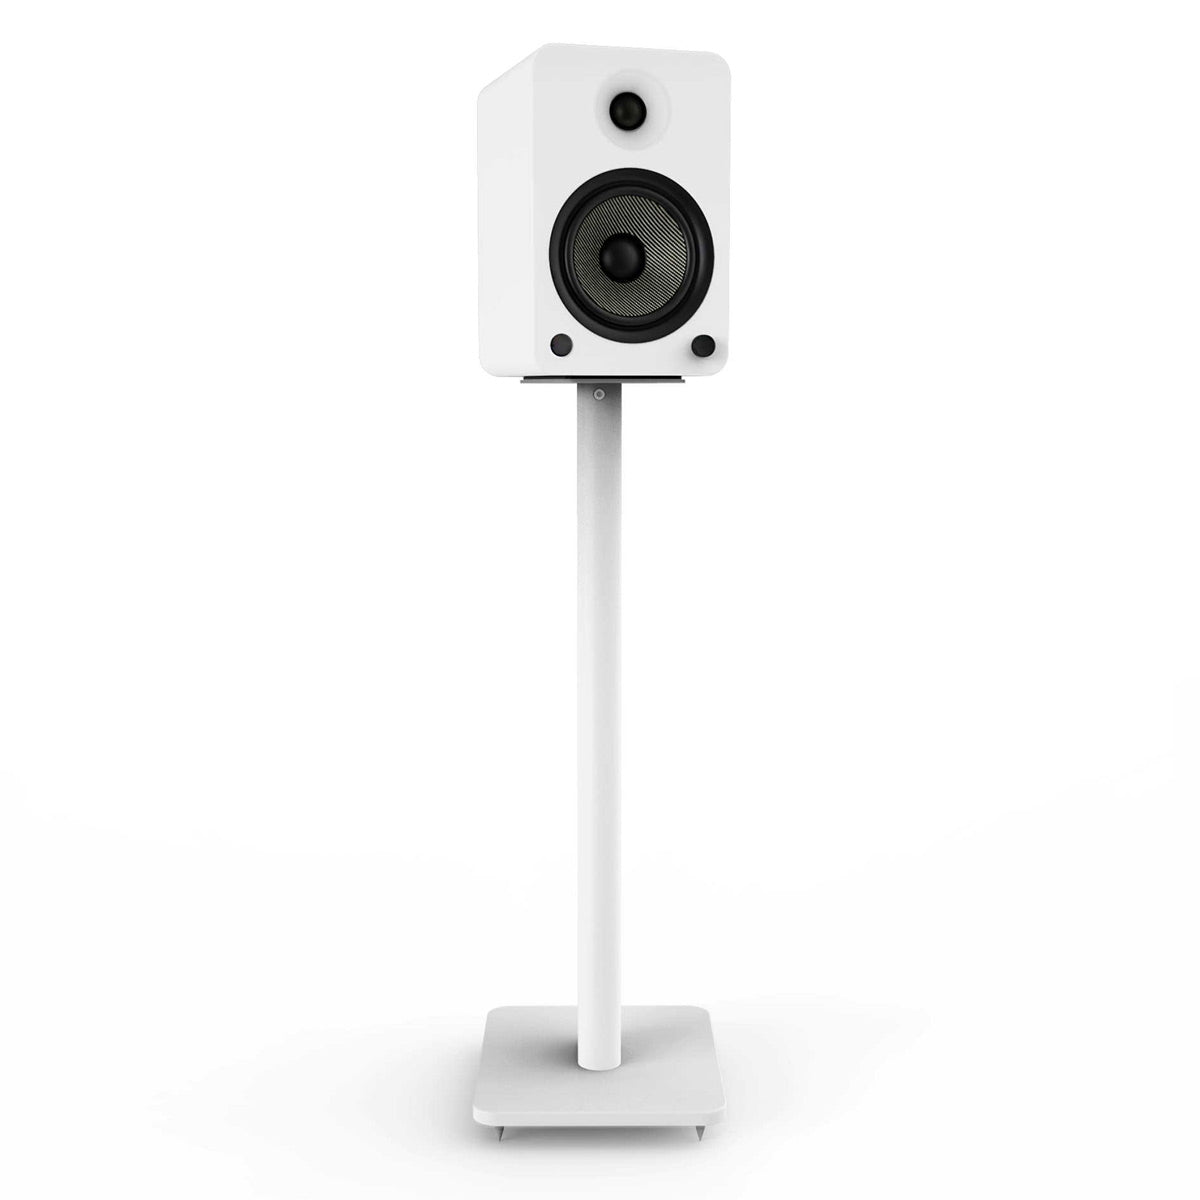 Kanto SP32PL 32" Bookshelf Speaker Stands with Rotating Top Plates and Cable Management – Pair (White)